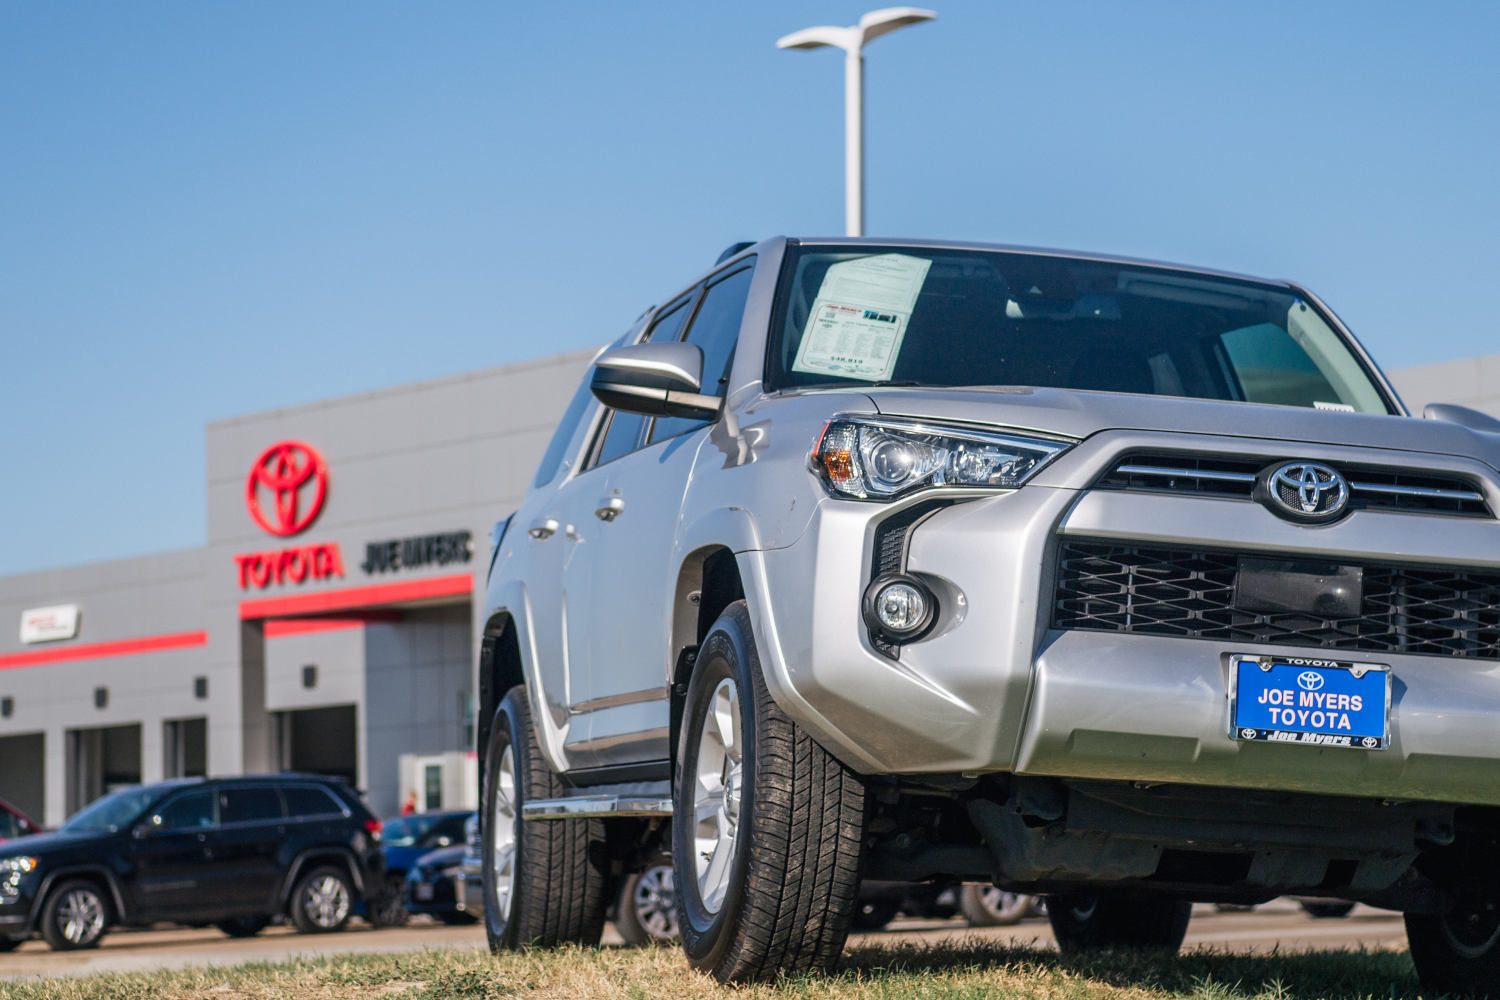 The Toyota car brand doesn't have the best dealership experience like the one seen here